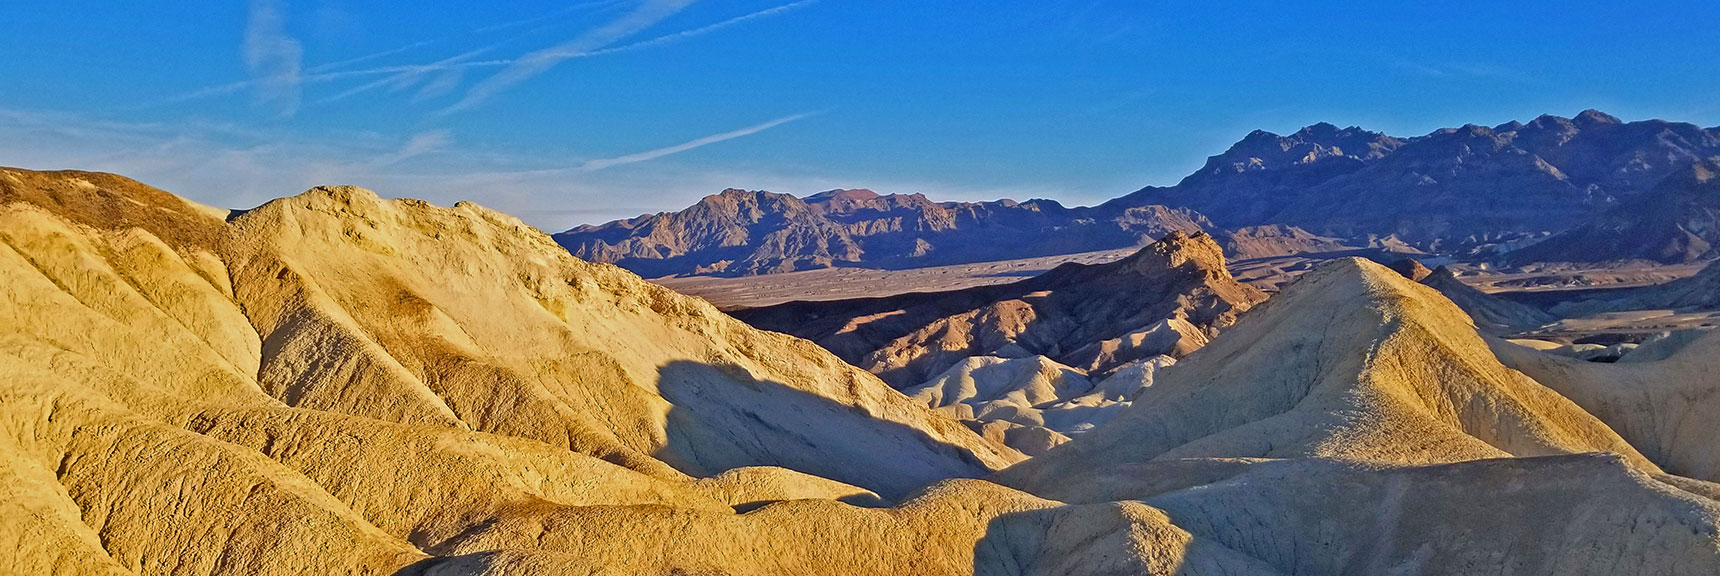 Canyon's Golden Hills to Backdrop of Funeral Mountains. | Twenty Mule Team Canyon | Death Valley National Park, California